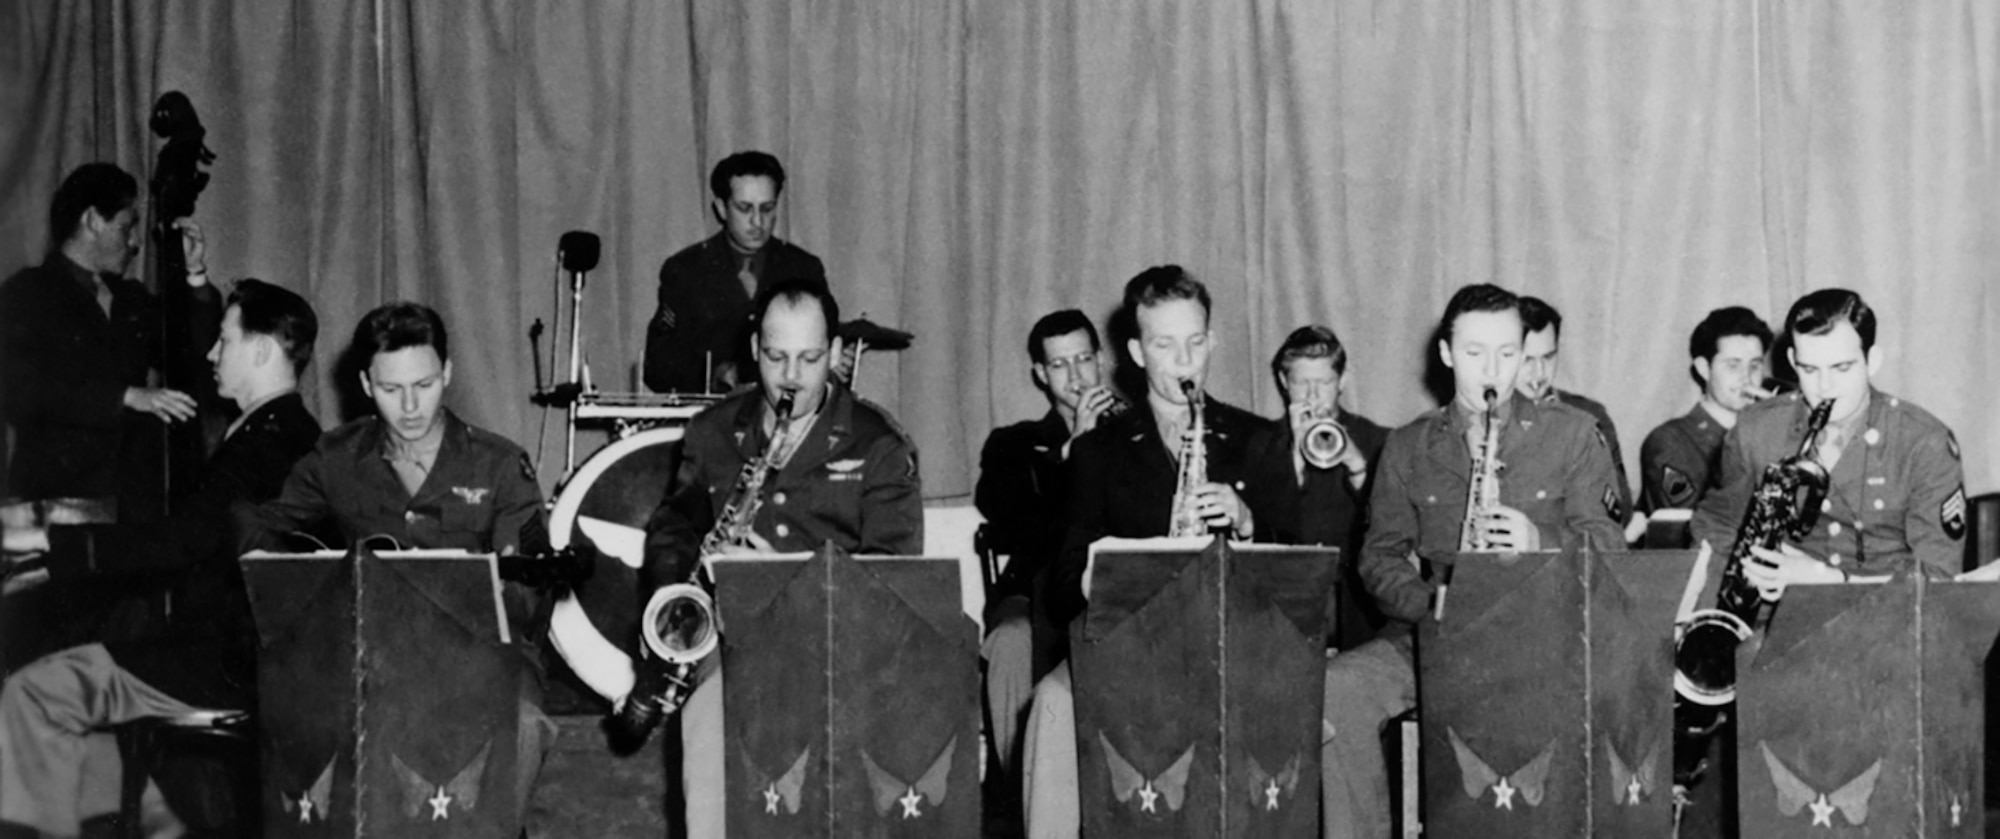 Harding Zumwalt (back center) performs with the Thunderbolt Dance Band in 1943.  (Courtesy Zumwalt family archives)